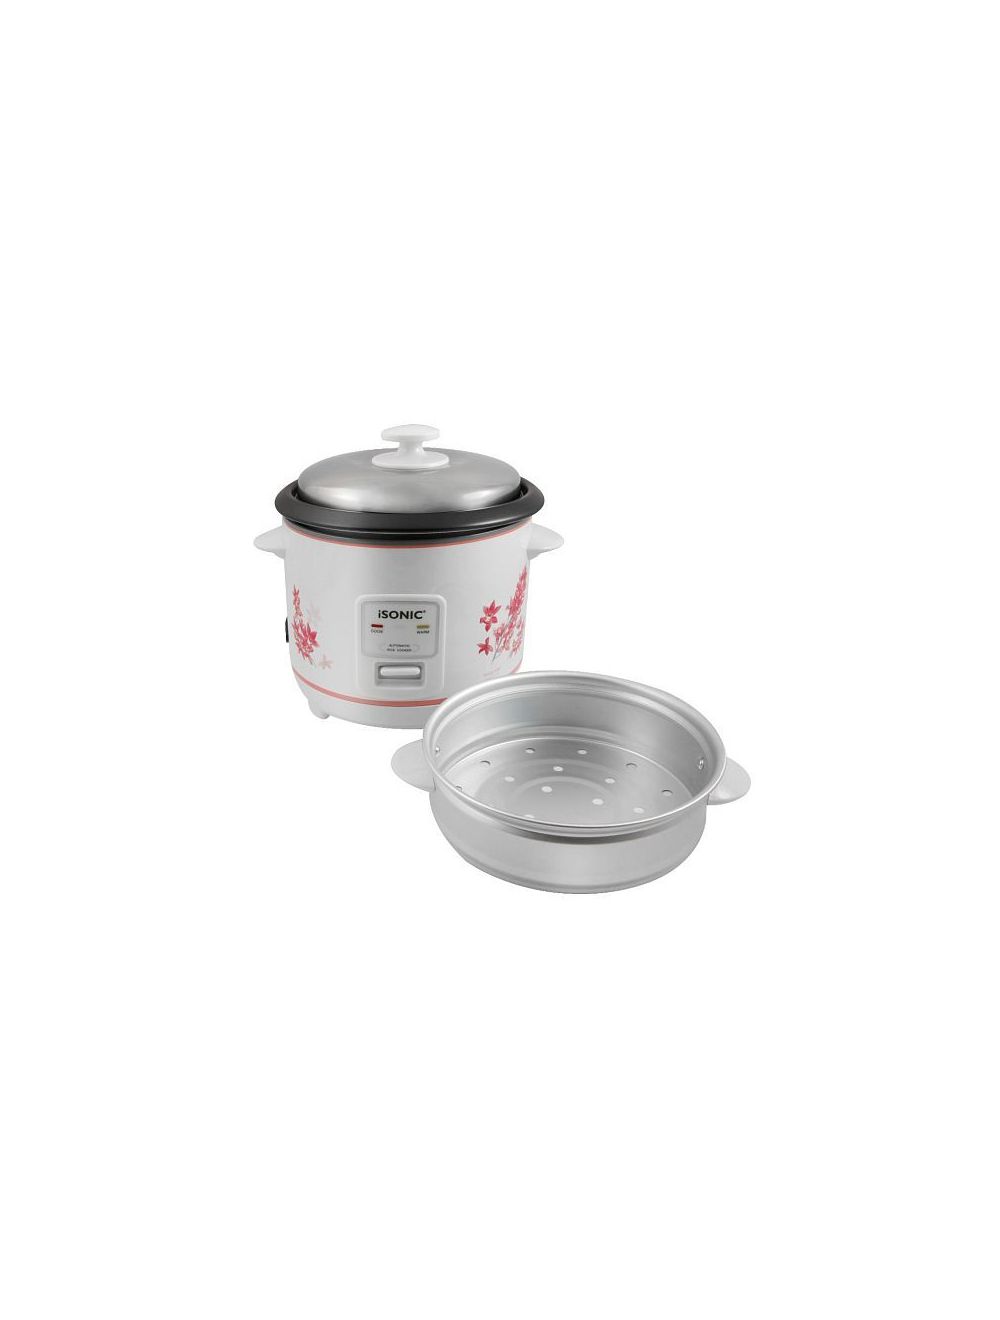 iSONIC 1.0L Automatic Rice Cooker-iRC 757